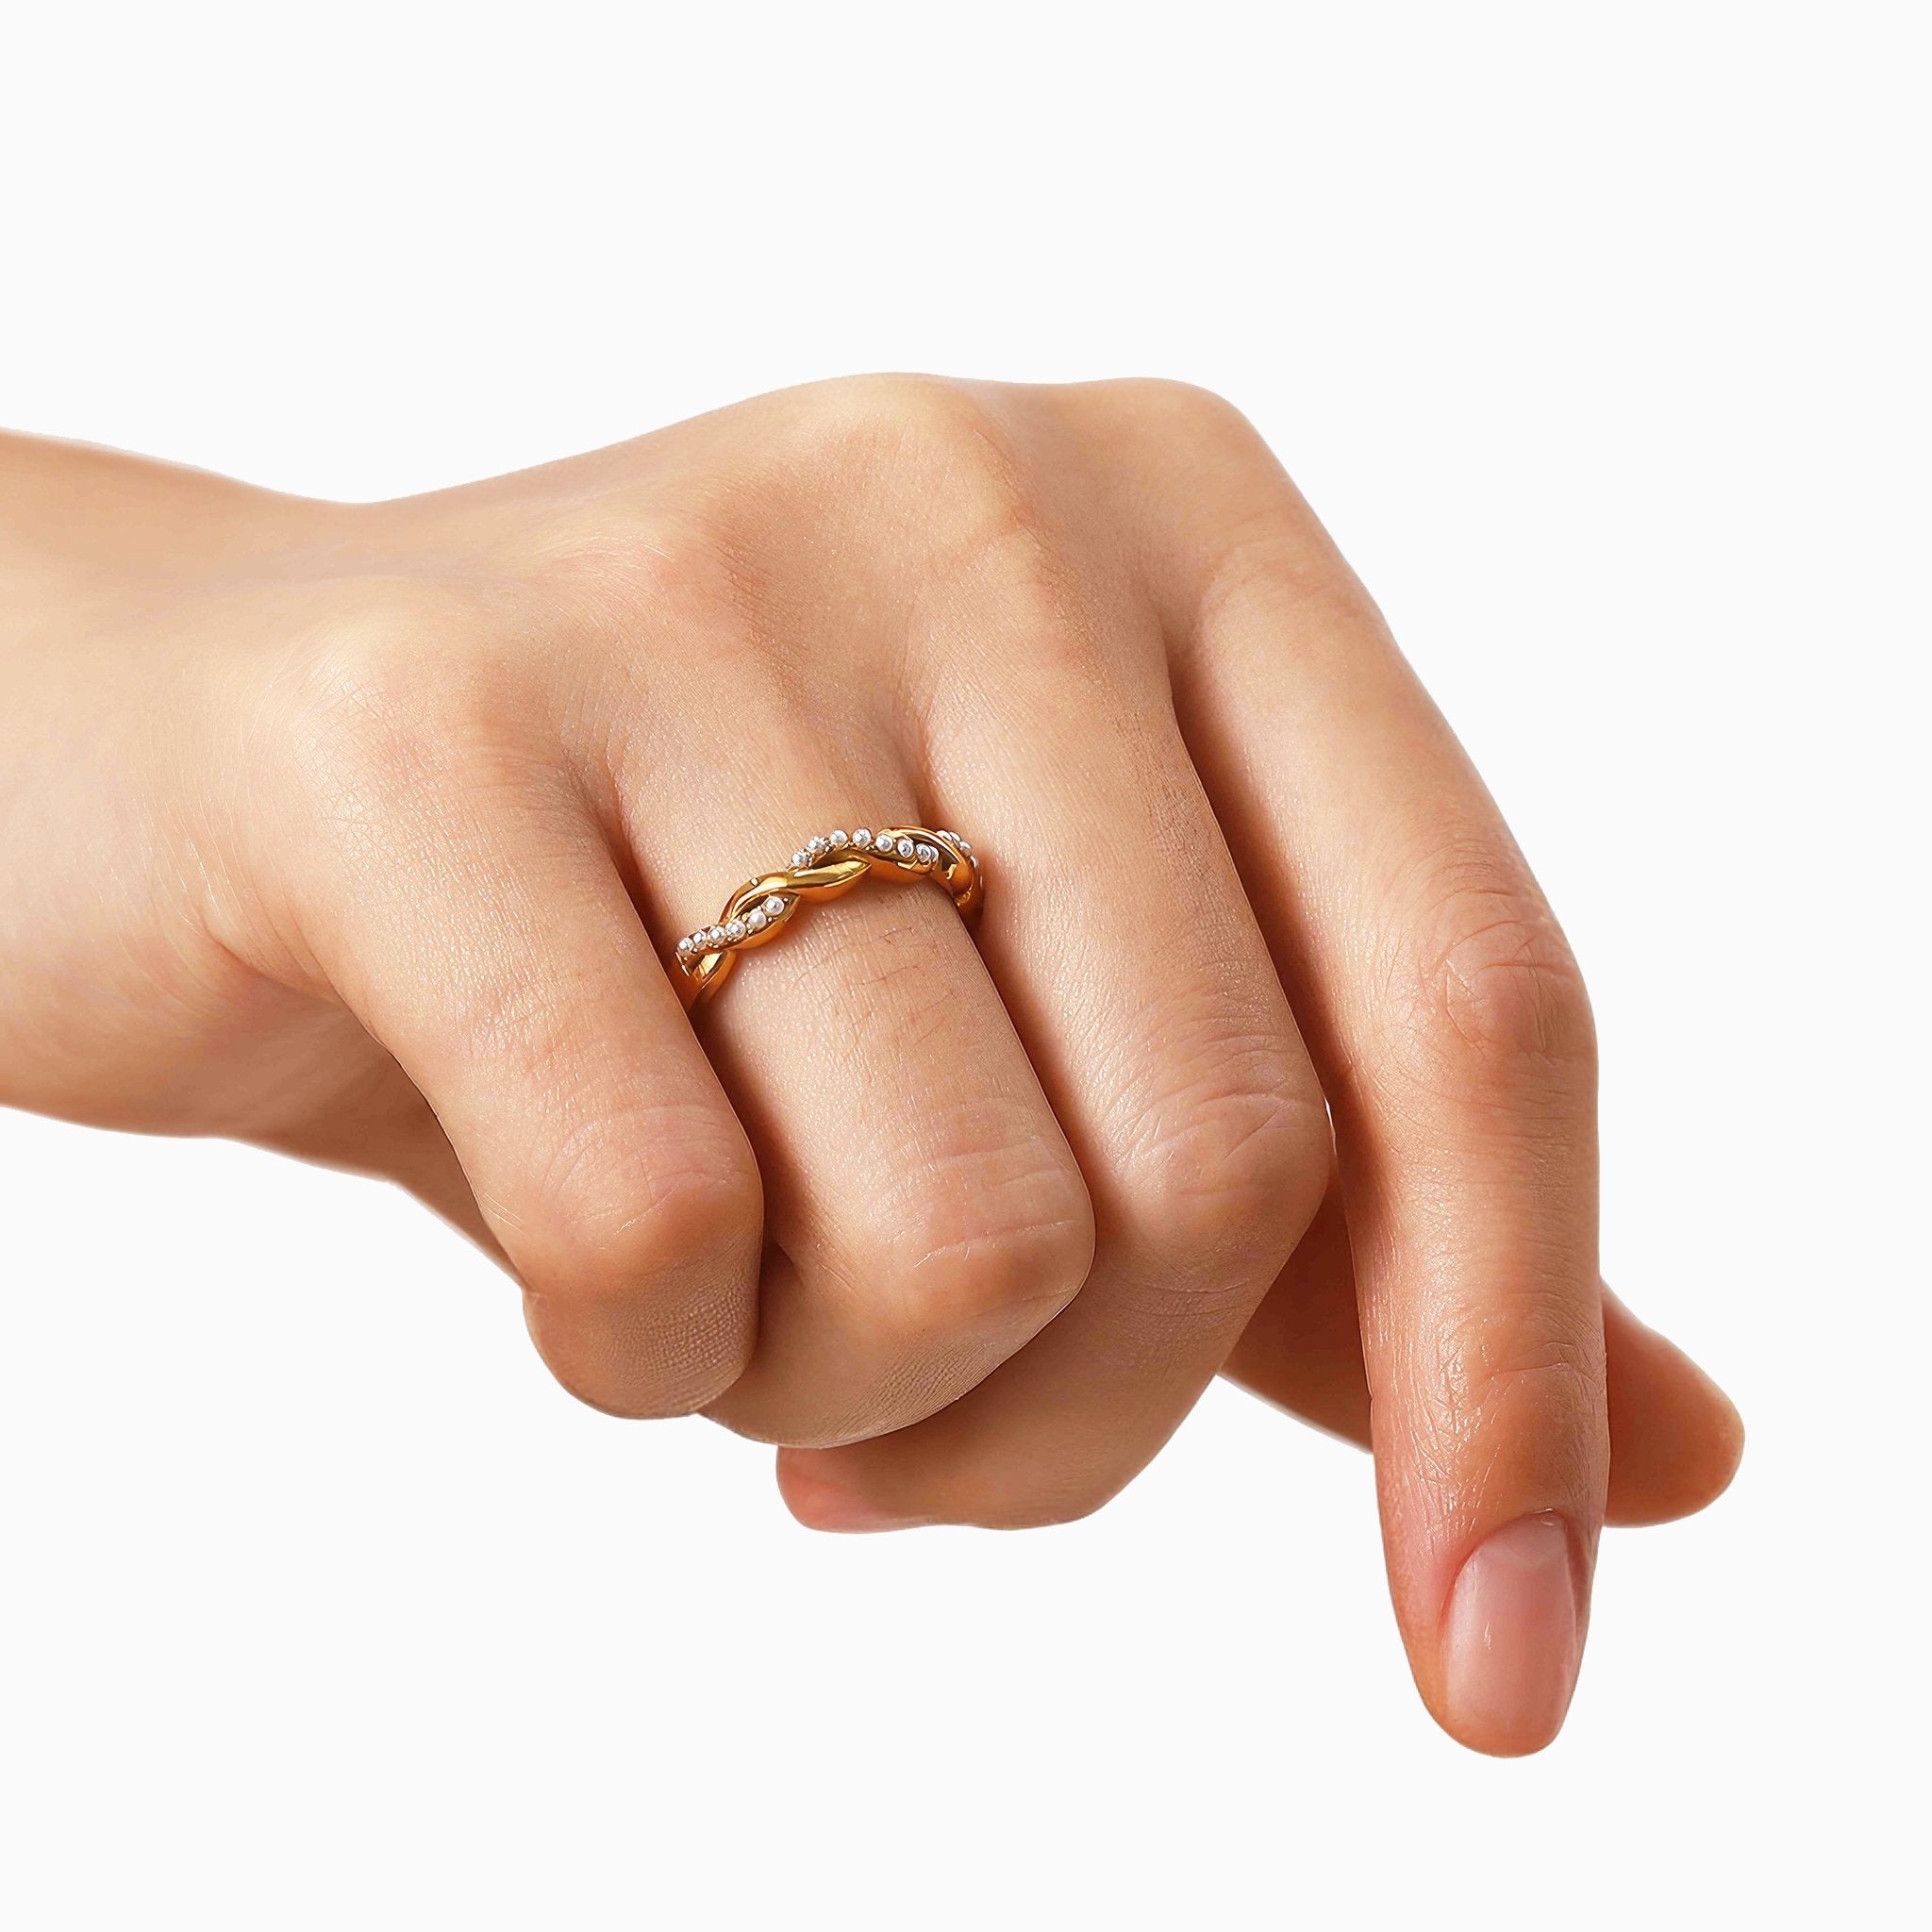 Braided Twist Geometric Ring with Pearls - Nobbier - Ring - 18K Gold And Titanium PVD Coated Jewelry